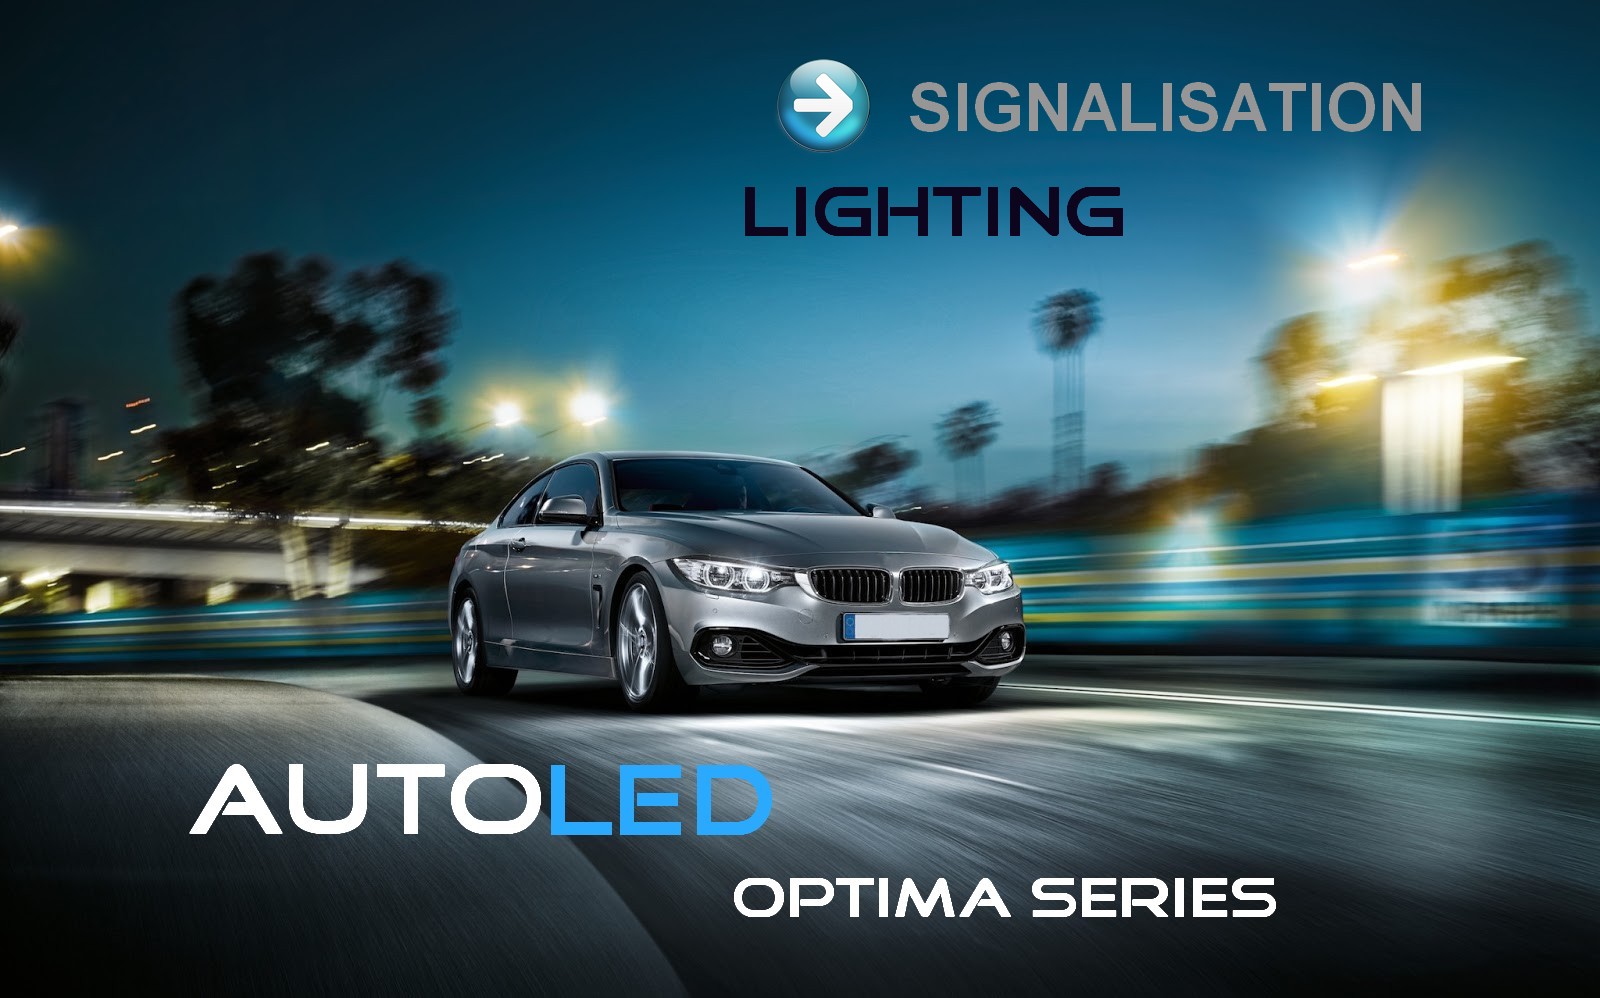 https://www.autoled.fr/wp-content/uploads/2021/11/autoled-gamme-optima-series.jpg